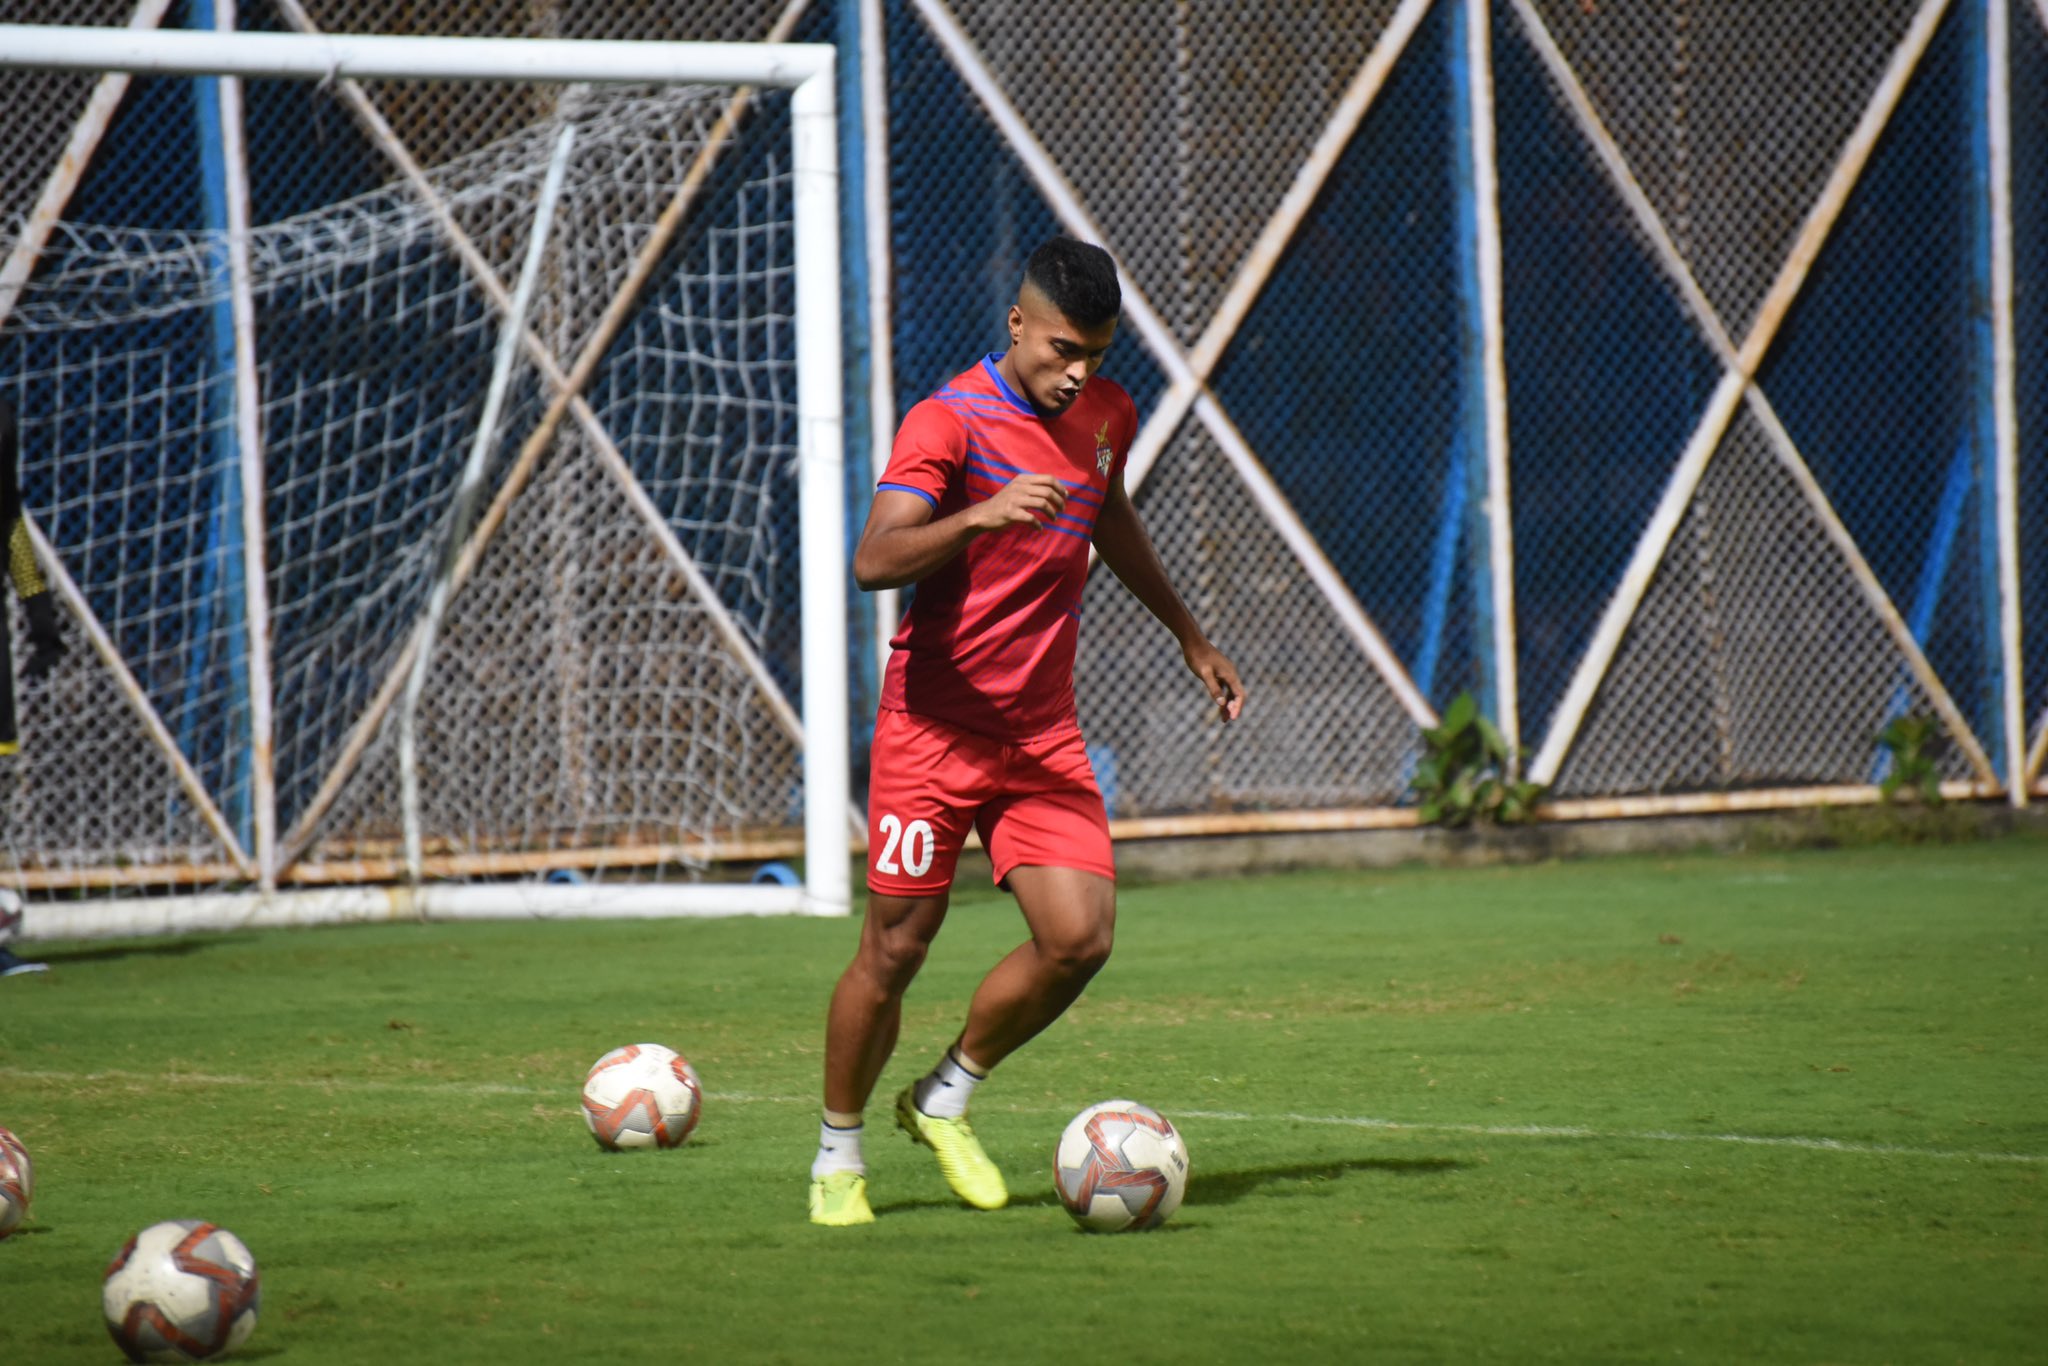 Position swap during India U-19 days helped me improve as footballer, admits Pritam Kotal